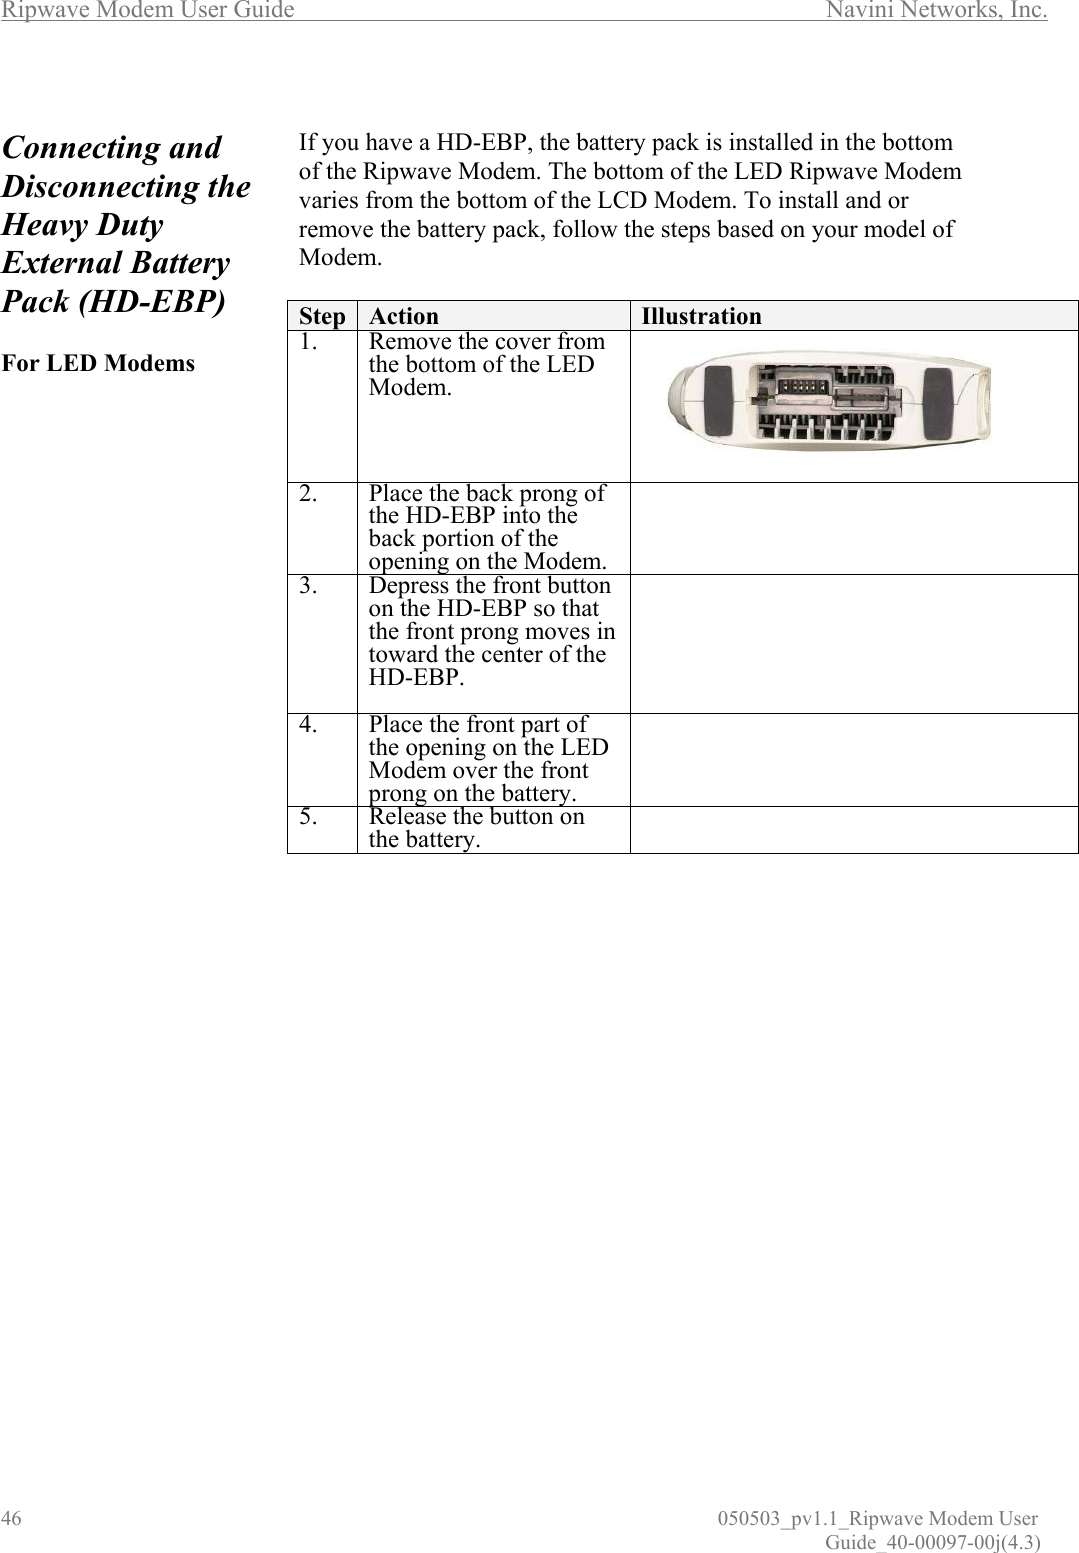 Ripwave Modem User Guide        Navini Networks, Inc. 46                          050503_pv1.1_Ripwave Modem User                                                                                                                                                               Guide_40-00097-00j(4.3)  Connecting and  Disconnecting the Heavy Duty External Battery Pack (HD-EBP)   For LED Modems                                       If you have a HD-EBP, the battery pack is installed in the bottom of the Ripwave Modem. The bottom of the LED Ripwave Modem varies from the bottom of the LCD Modem. To install and or remove the battery pack, follow the steps based on your model of Modem.  Step  Action  Illustration 1.  Remove the cover from the bottom of the LED Modem.  2.  Place the back prong of the HD-EBP into the back portion of the opening on the Modem.  3.  Depress the front button on the HD-EBP so that the front prong moves in toward the center of the HD-EBP.   4.  Place the front part of the opening on the LED Modem over the front prong on the battery.   5.  Release the button on the battery.   